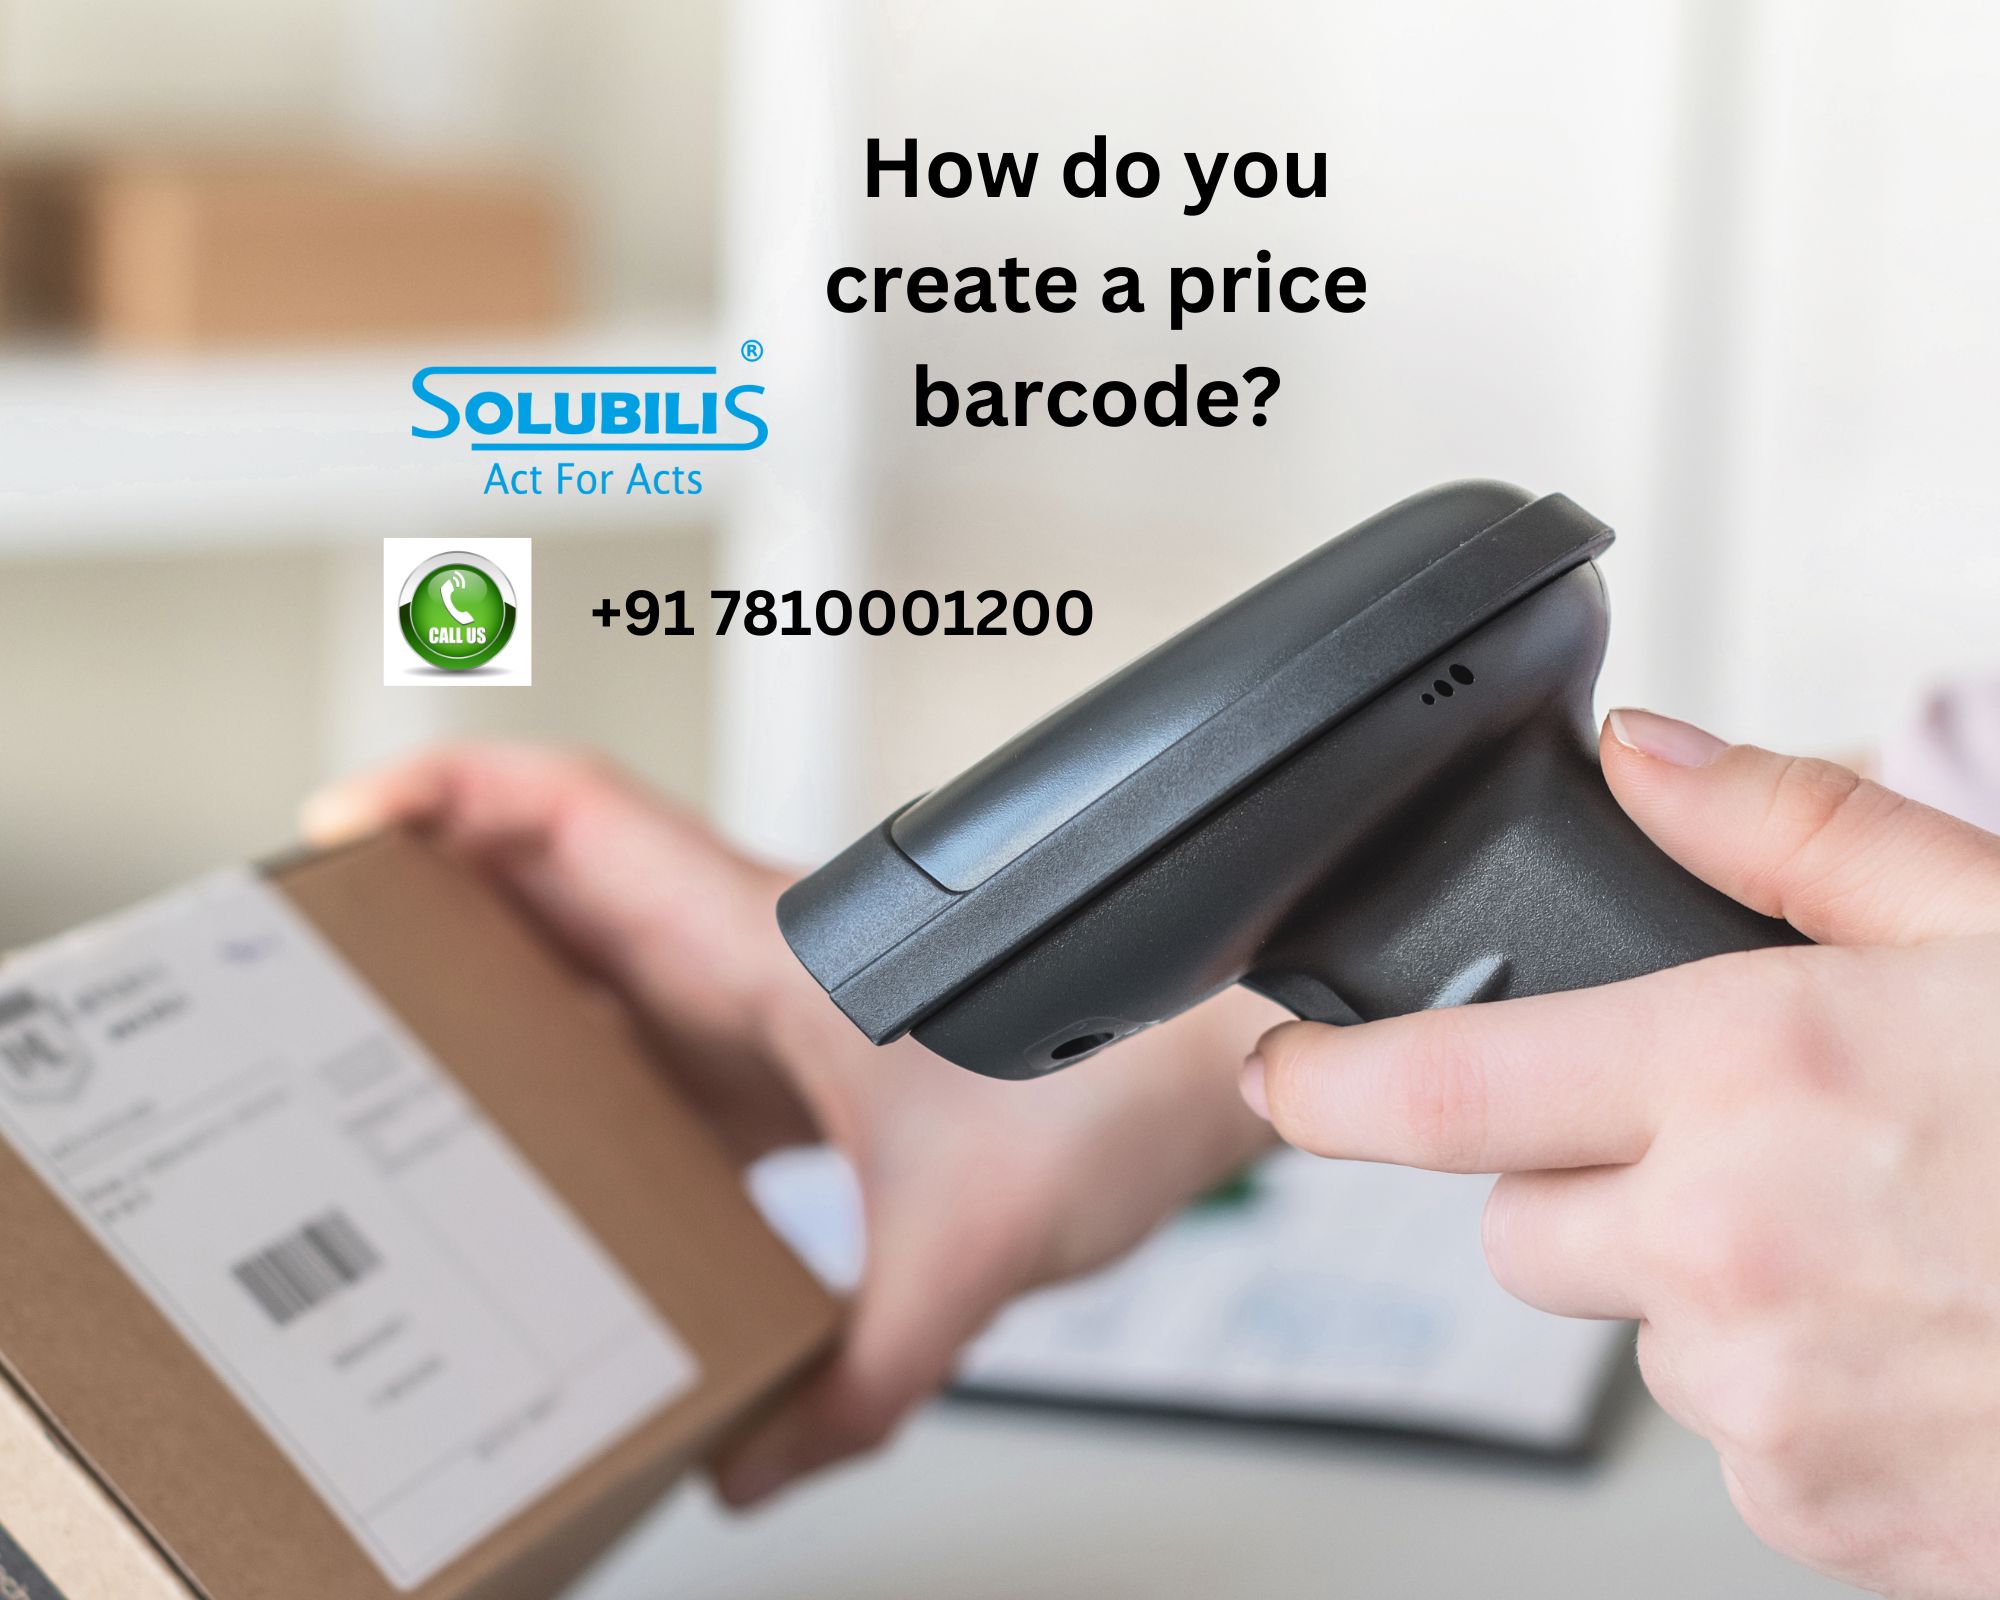 How do you create a price barcode?